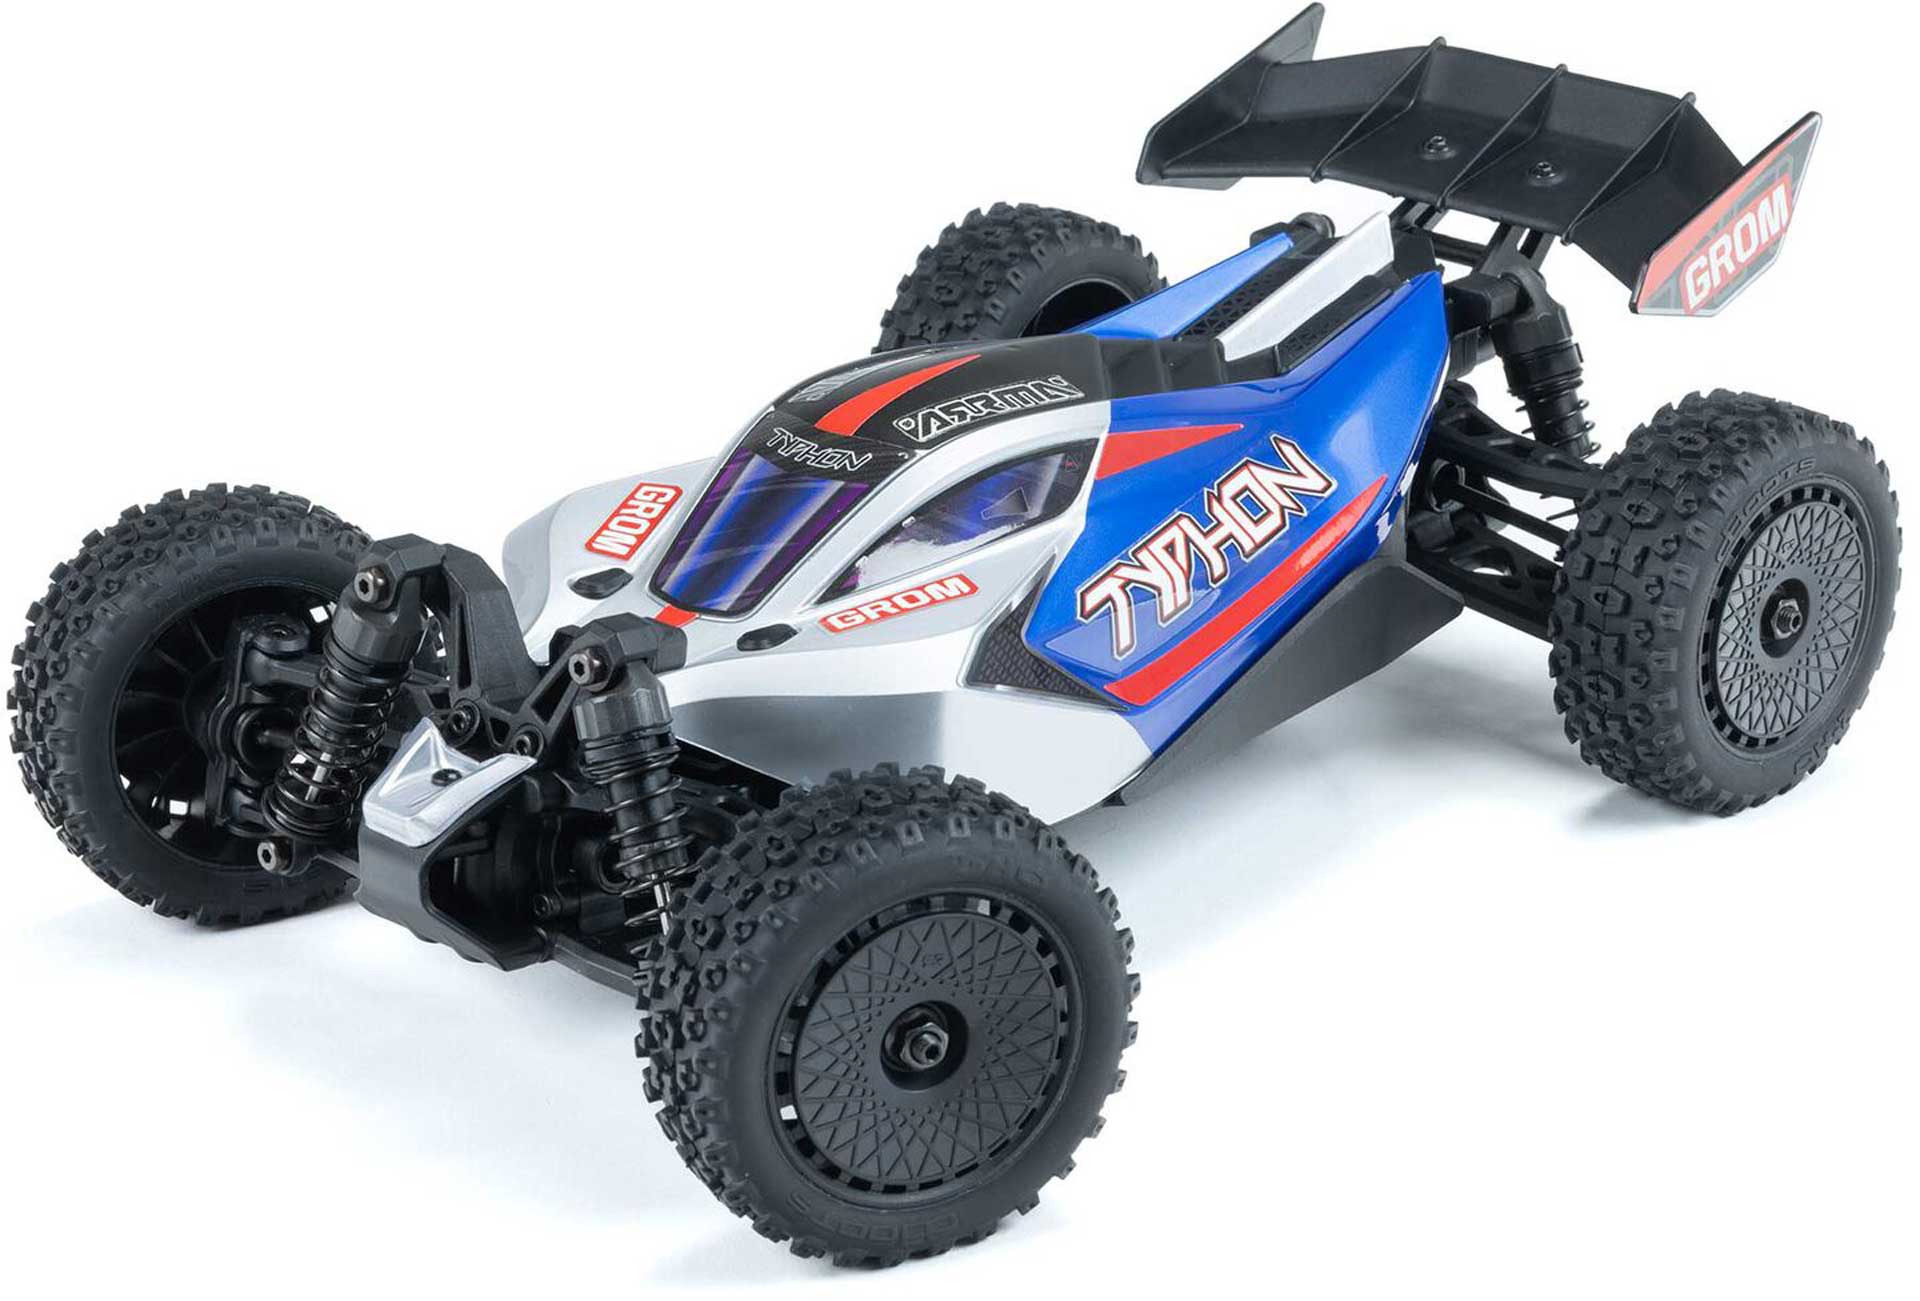 ARRMA TYPHON GROM MEGA 380 Brushed 4X4 Small Scale Buggy RTR avec batterie & chargeur, bleu/argent